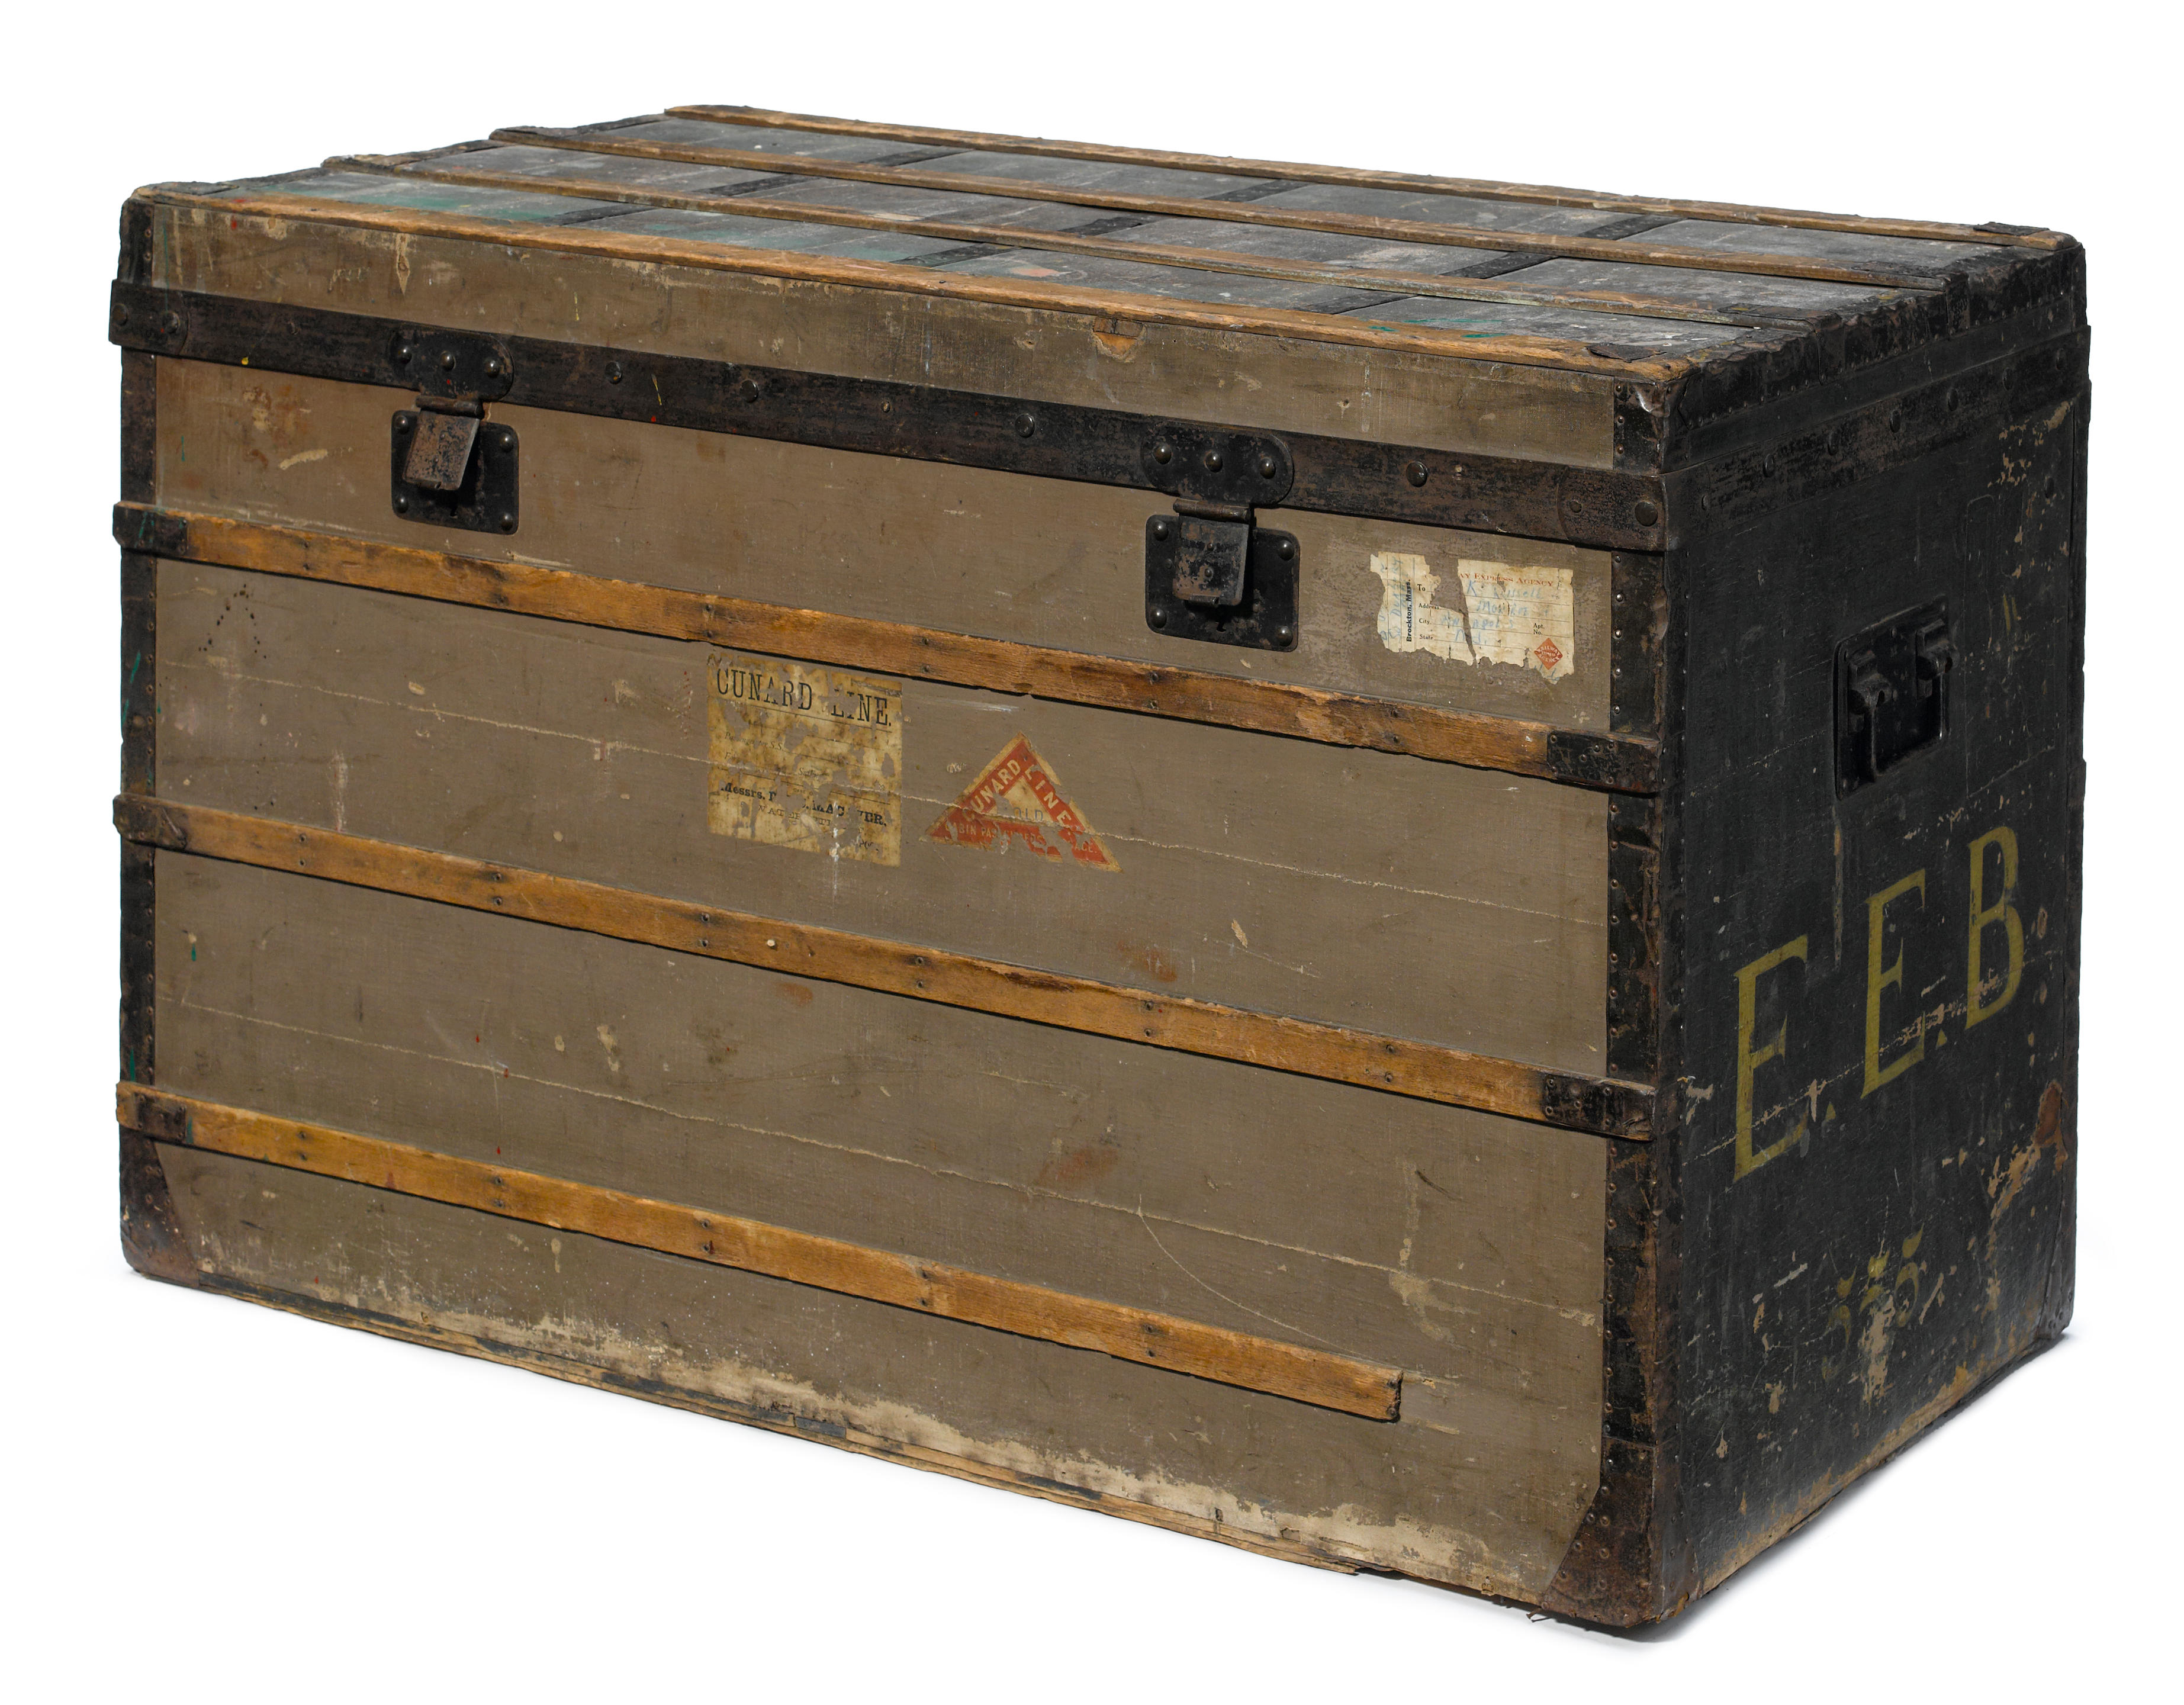 Sold at Auction: EARLY LOUIS VUITTON TRIANON STEAMER TRUNK C. 1889